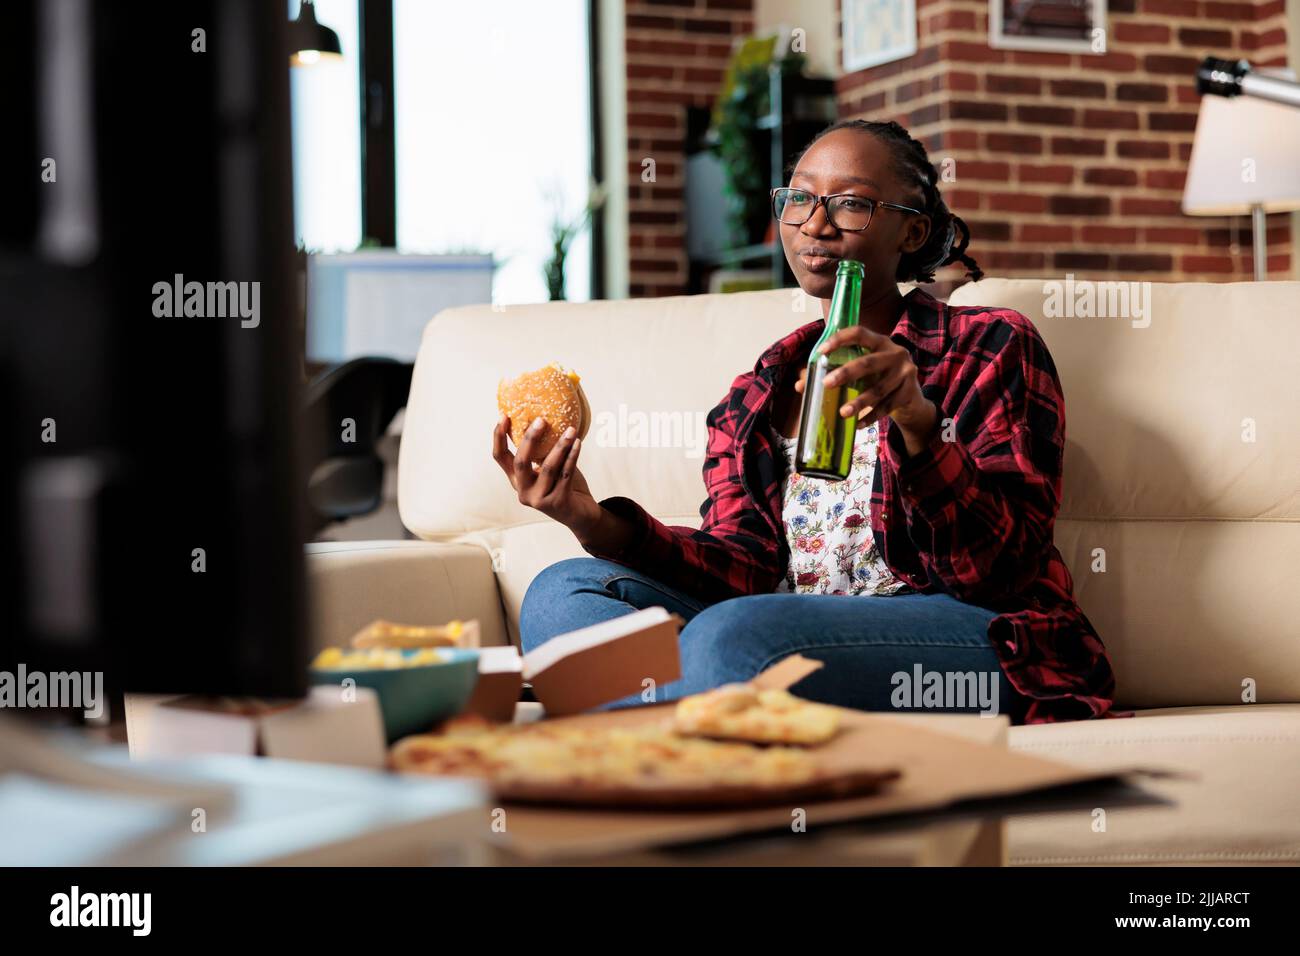 Smiling woman eating burger and drinking bottle of beer, enjoying leisure activity and fun movie on television. Having takeaway fast food delivery meal with beverage and snacks at home. Stock Photo